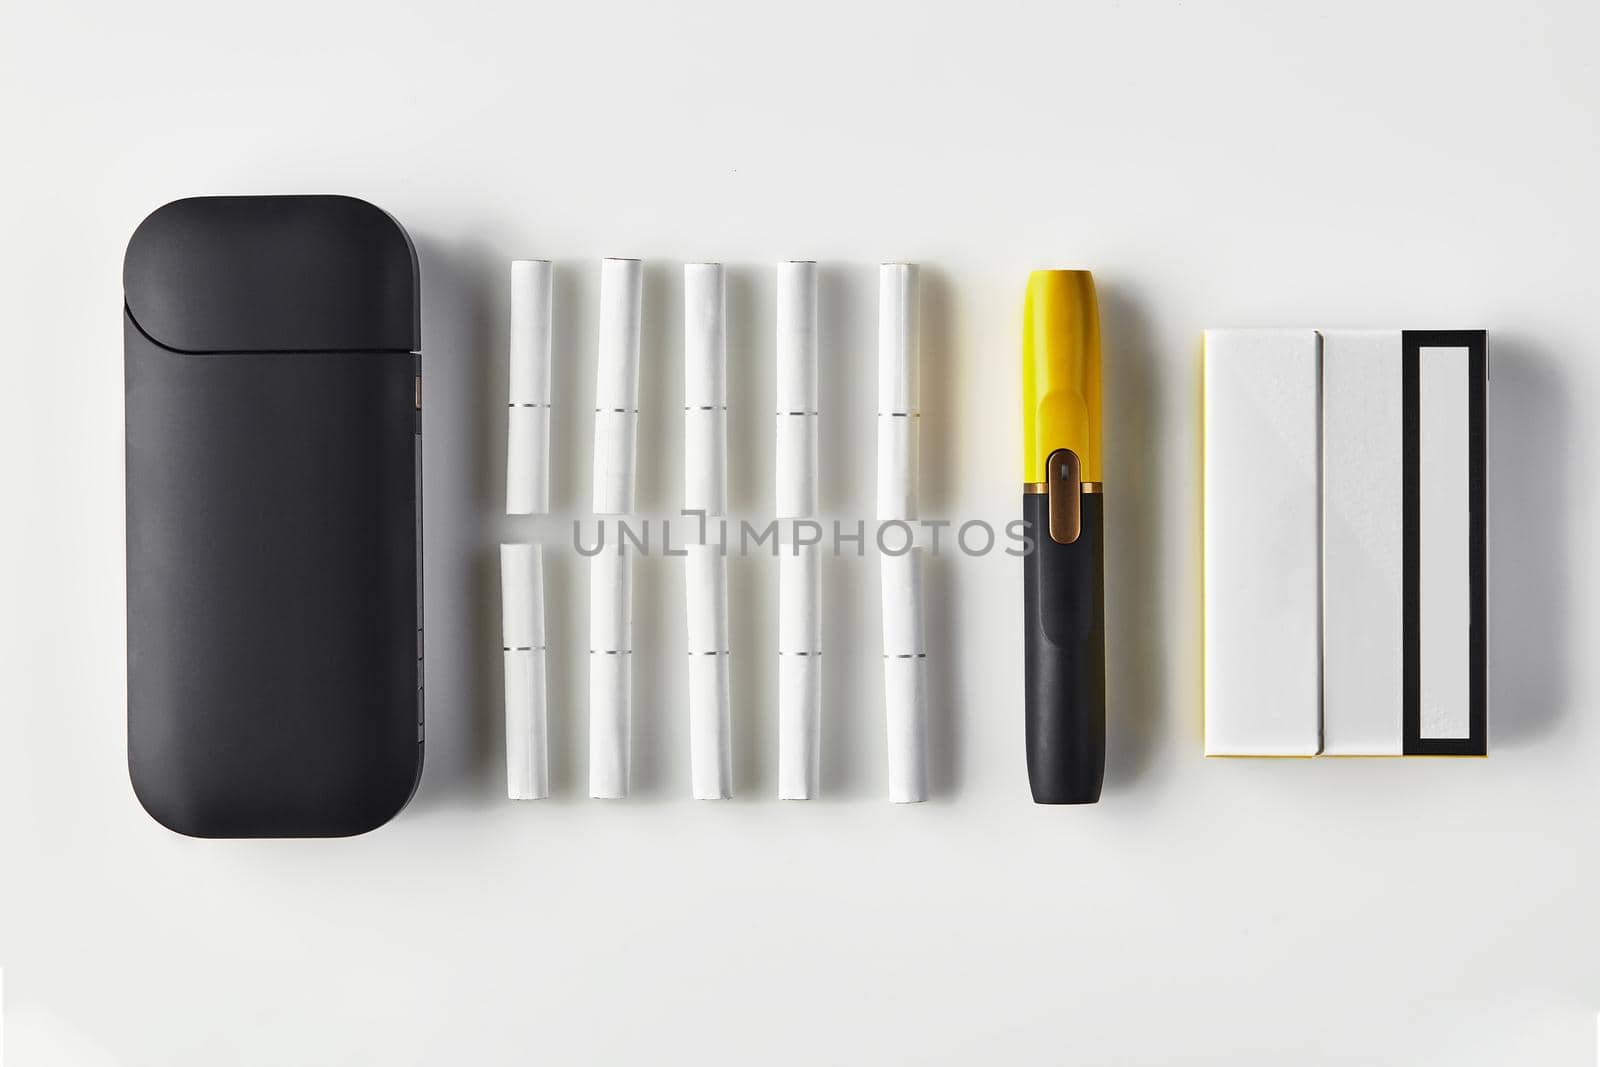 New generation black and yellow electronic cigarette and battery, one pack and ten heatsticks isolated on white. Heating tobacco system. Template place for your text, image. Close up, flat lay